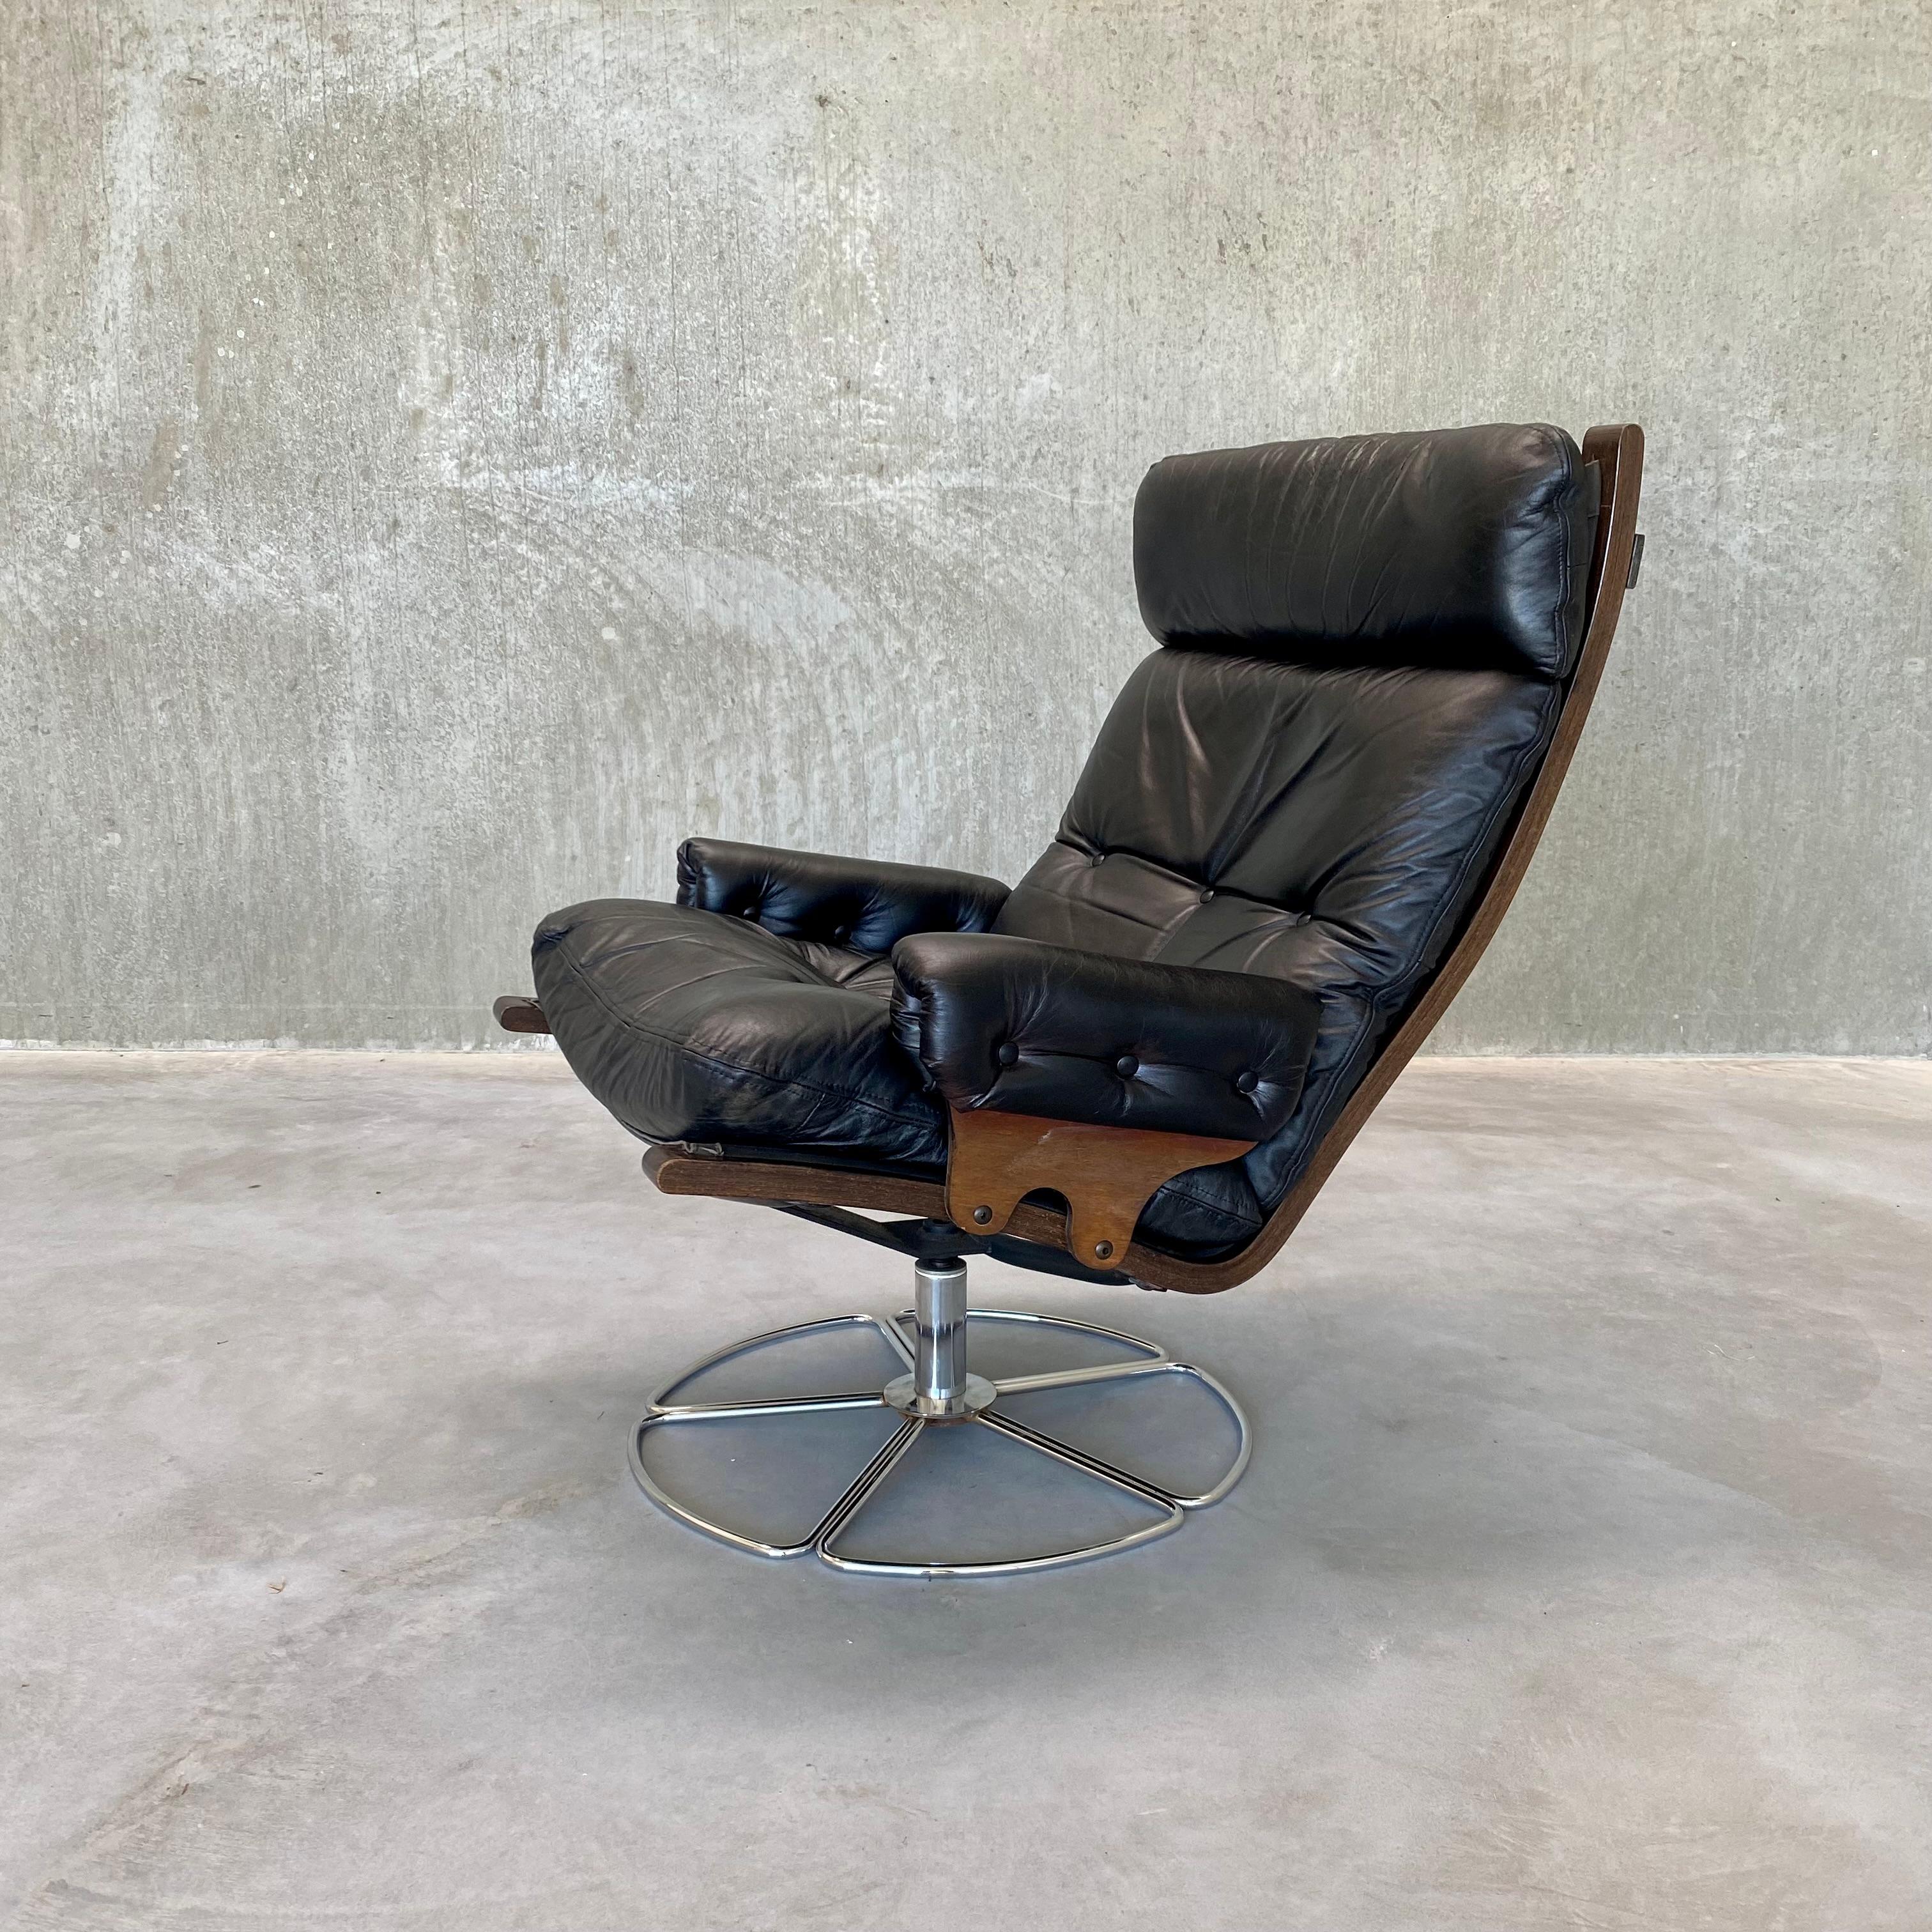 Designer: Bruno Mathsson
Manufacturer: Dux
Model: Swiffle lounge chair
Material: leather upholstery, wood and canvas frame

Measurements:
Height: 91 cm / 36 inch 
Width: 71 cm / 28 inch
Depth: 83 cm / 33 inch
Seat Height: 40 cm / 16